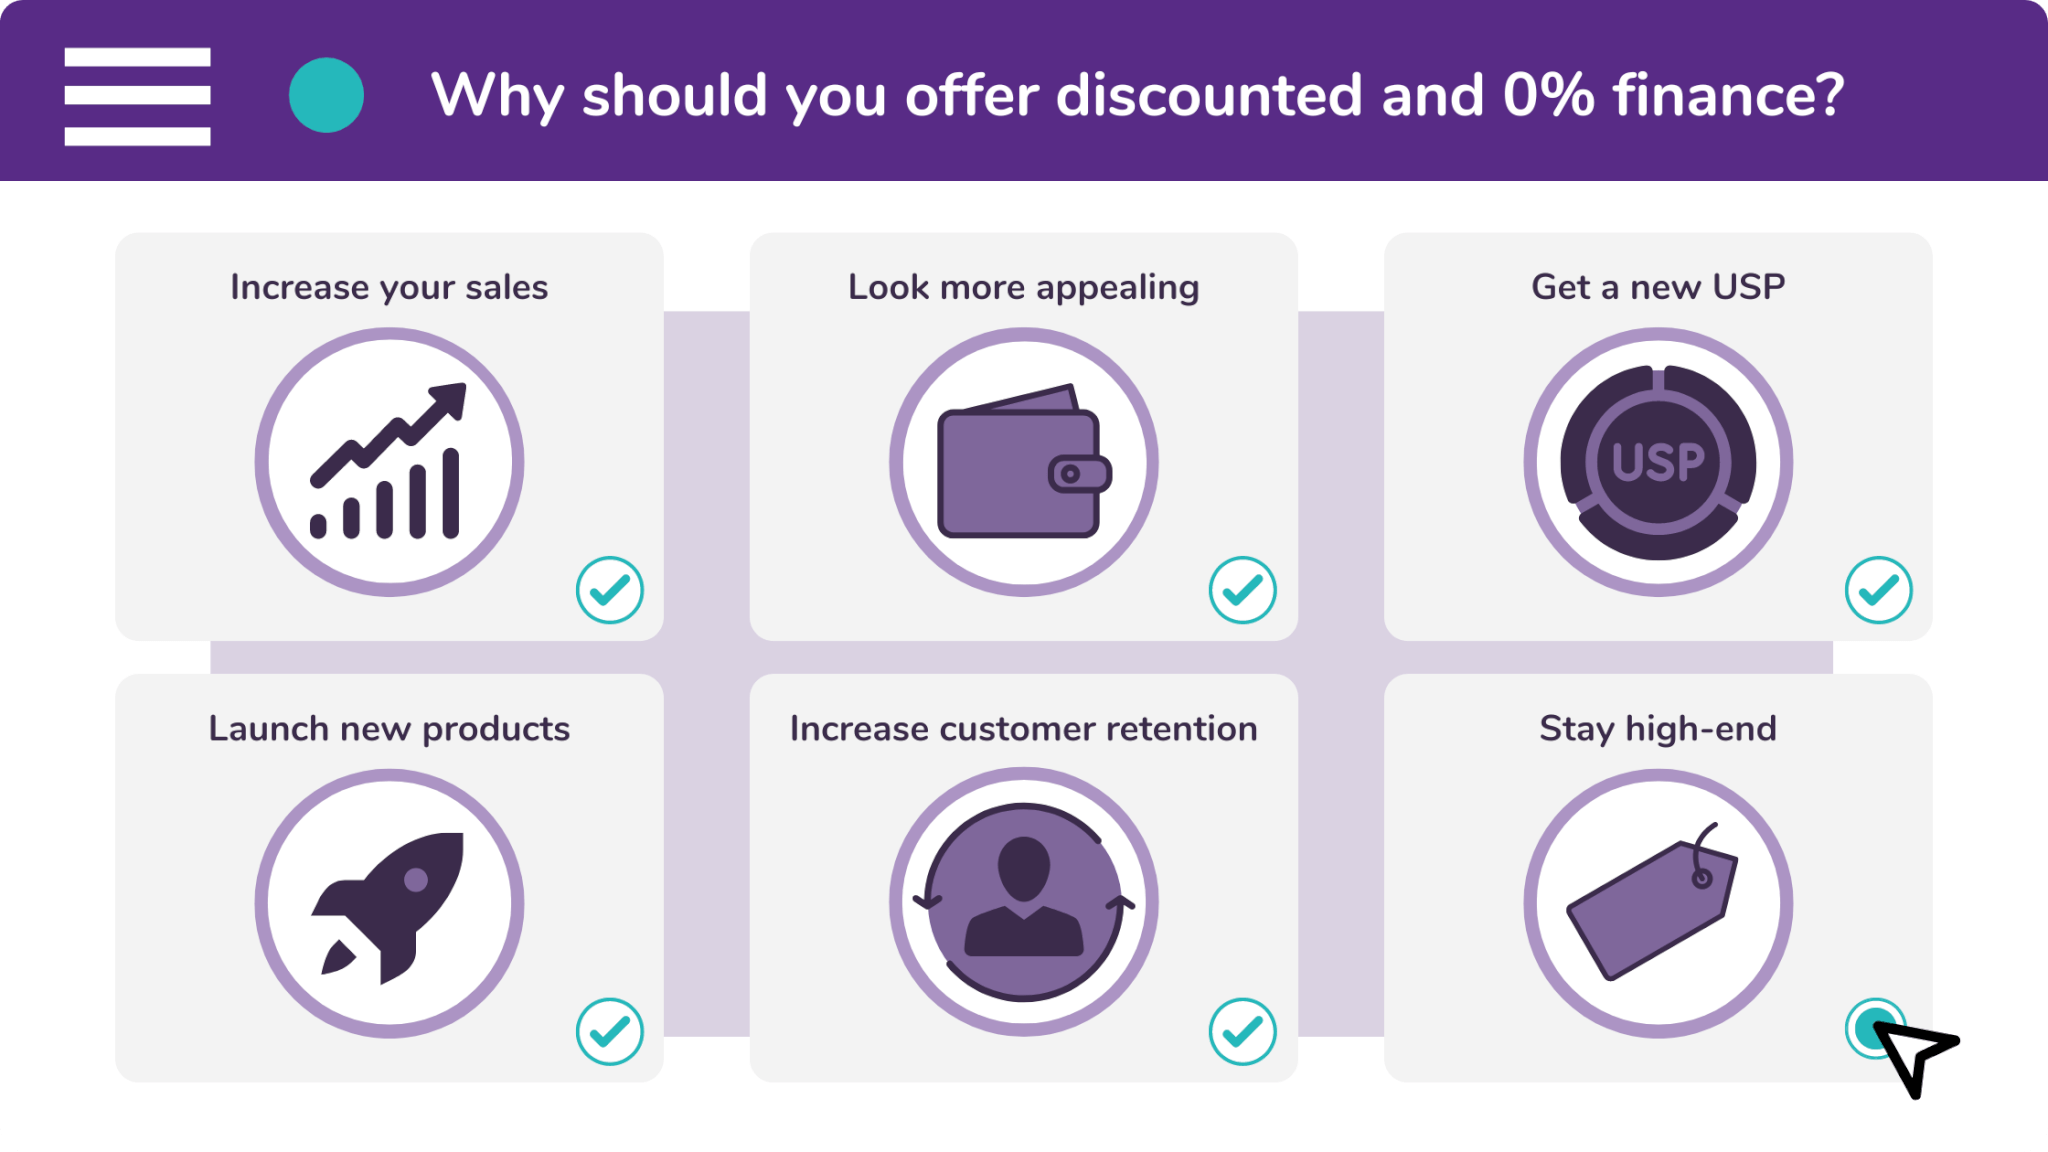 There are six reasons why you should offer discounted and 0% finance. These are: to increase your sales, to look more appealing, to get a new USP, to launch new products, to increase customer retention, and to stay high-end.